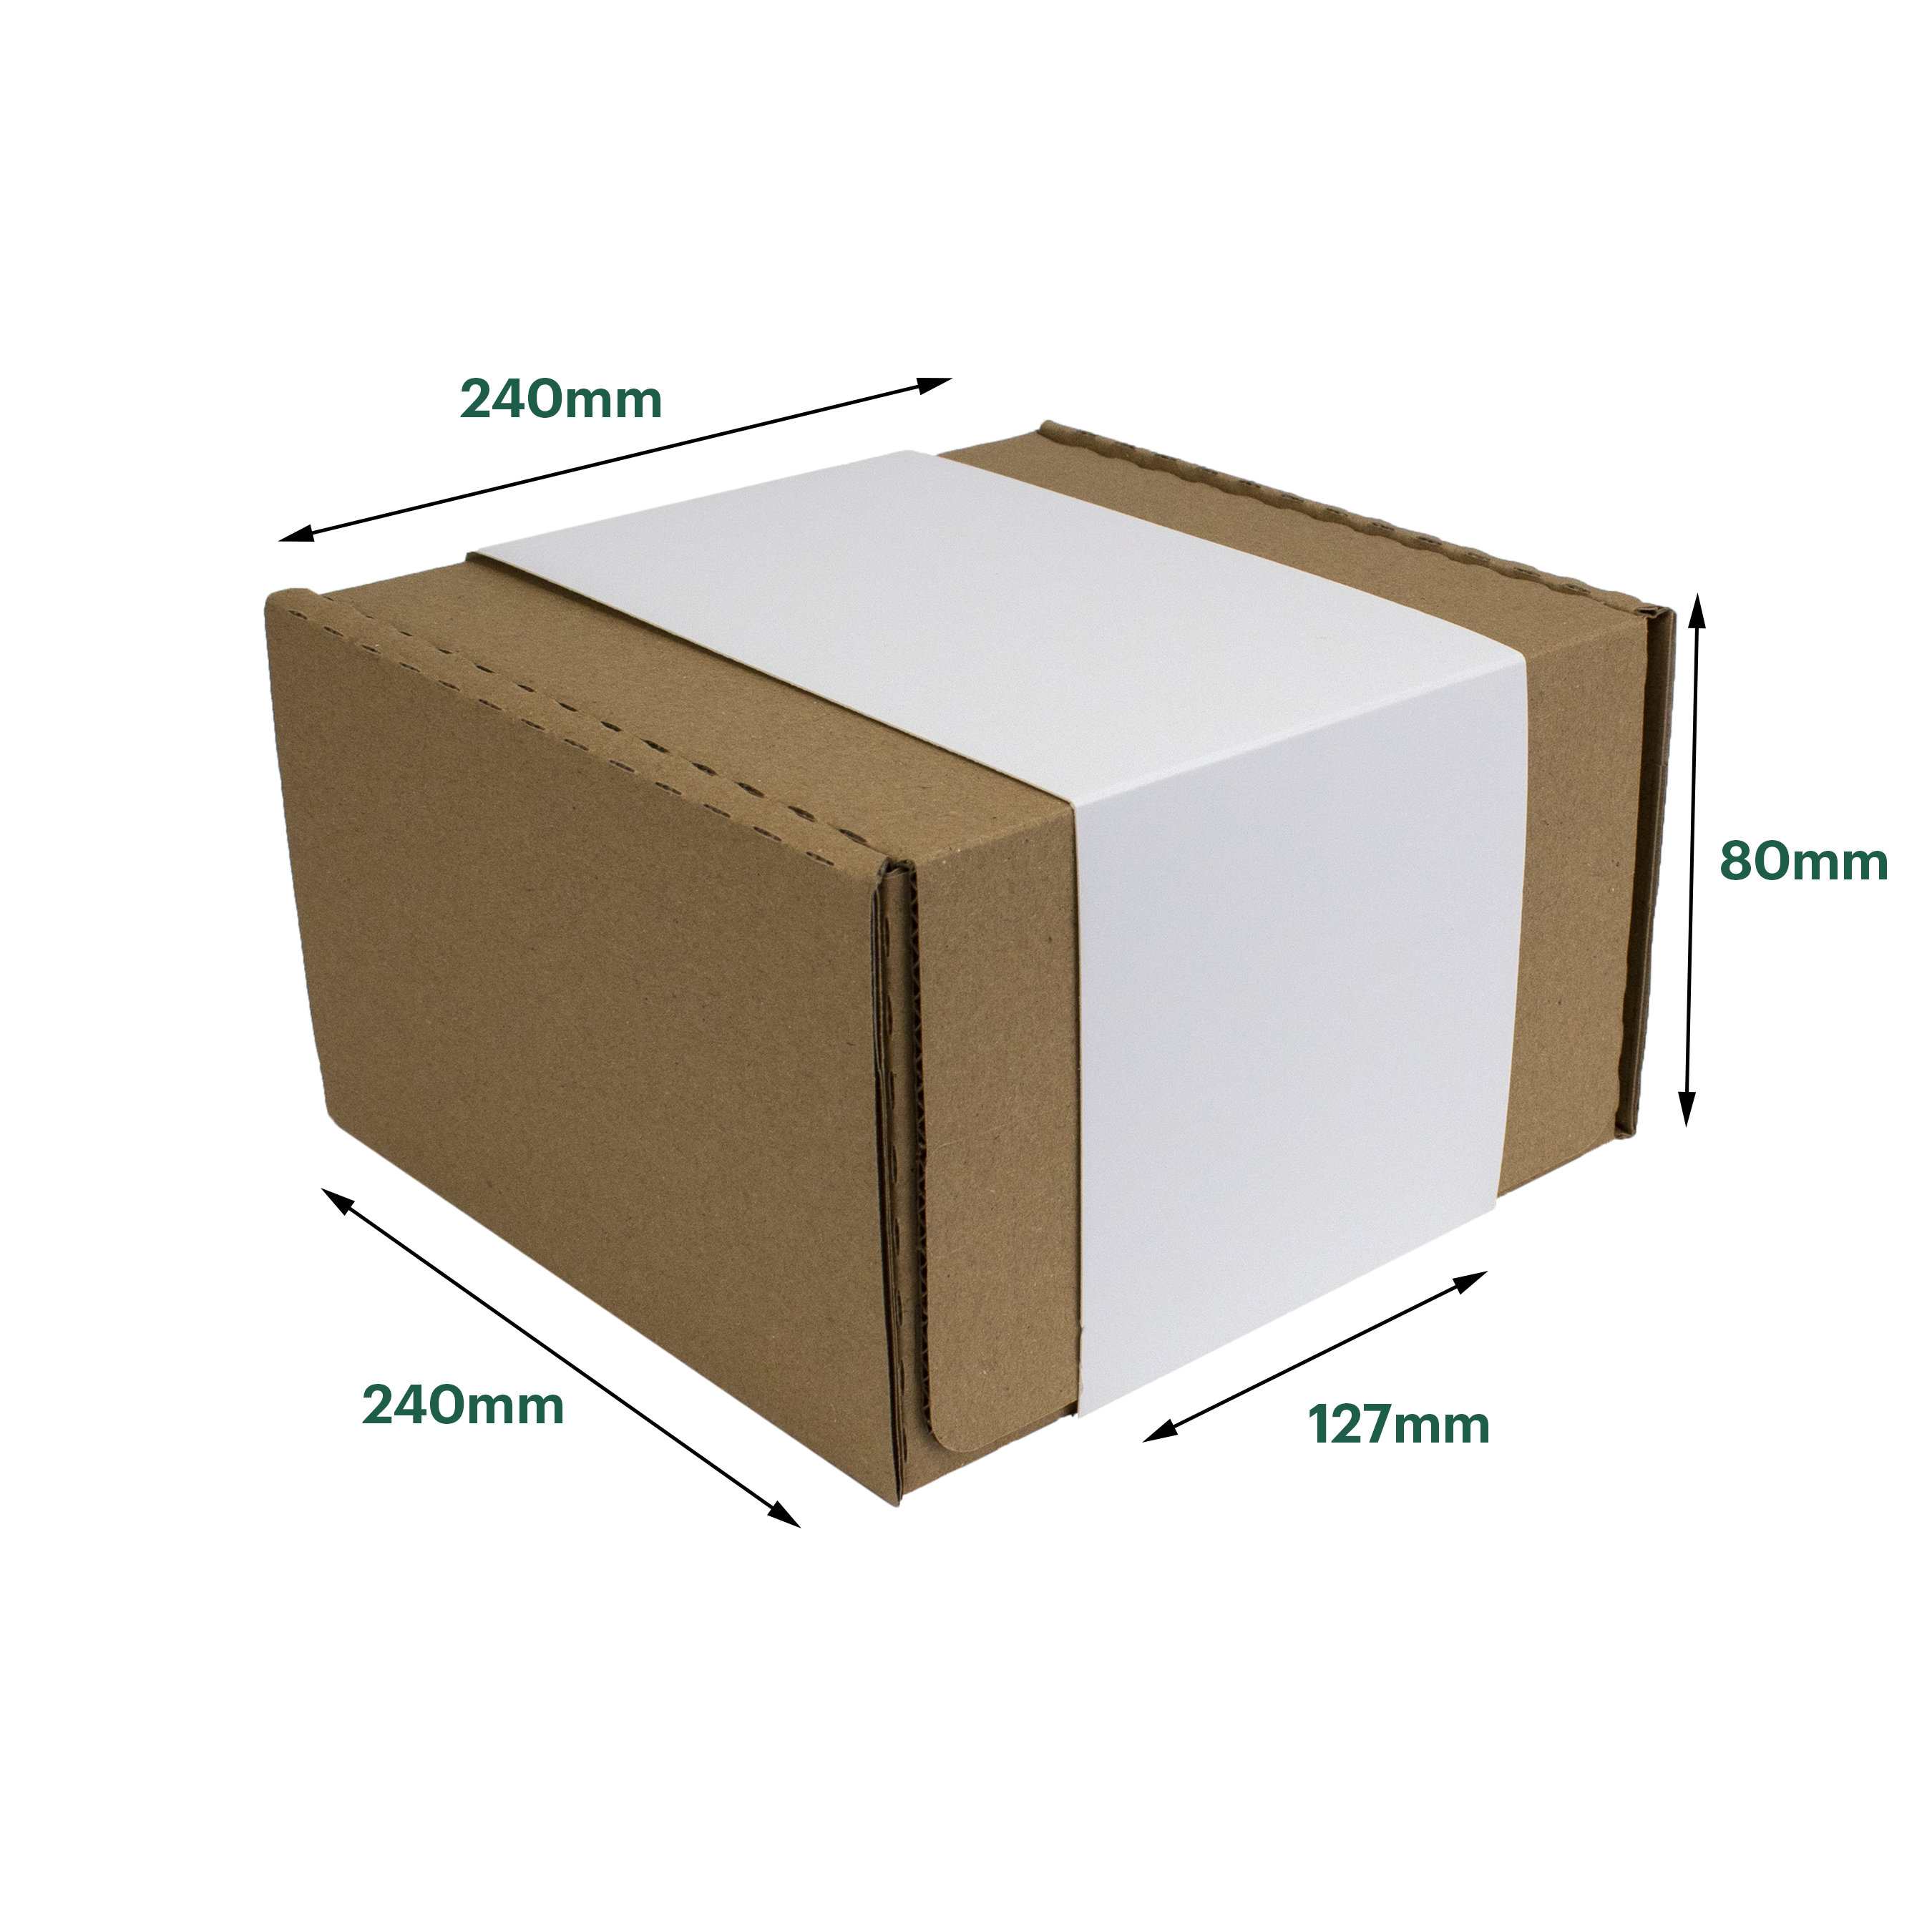 MBT6 240x240x80mm Box and Sleeve with size